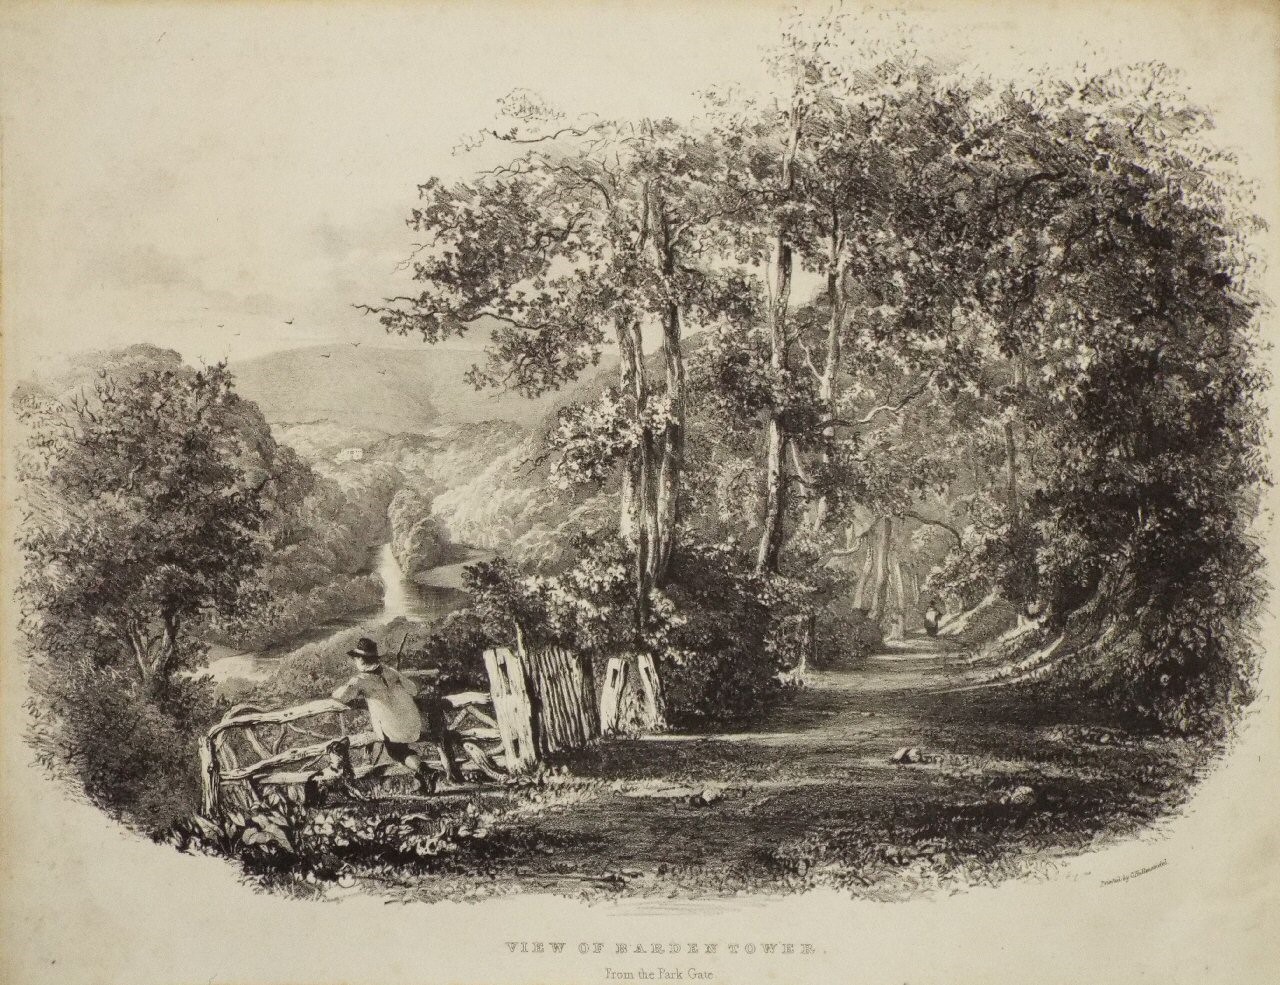 Lithograph - View of Barden Tower. From the Park Gate. - Davis